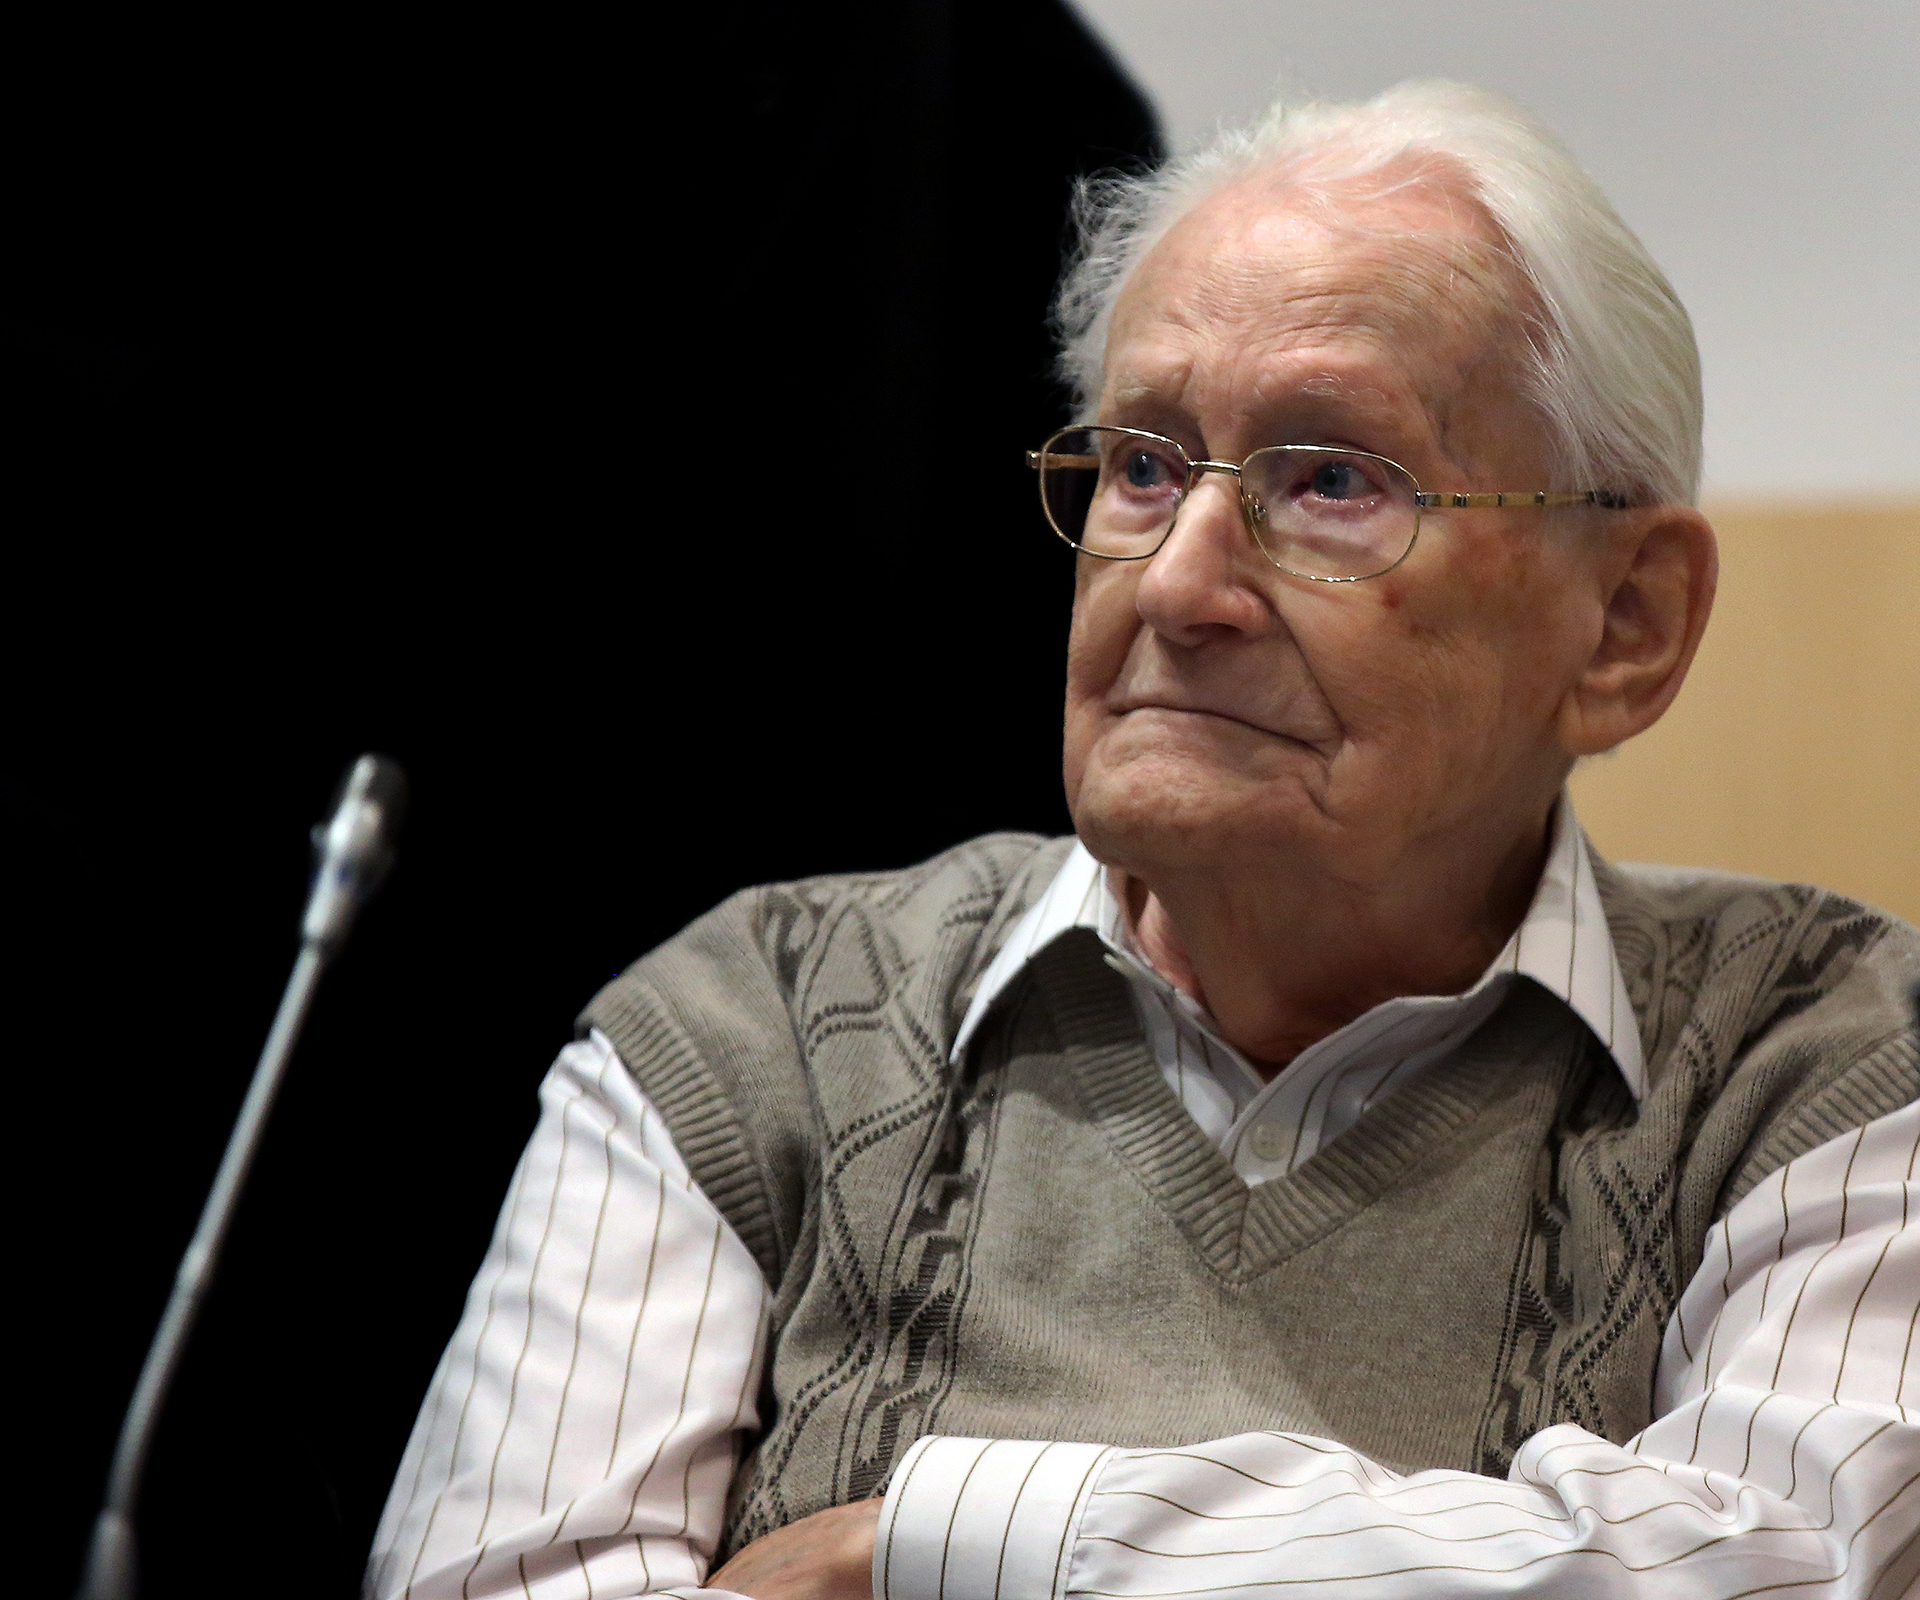 The “bookkeeper of Auschwitz” stands trial